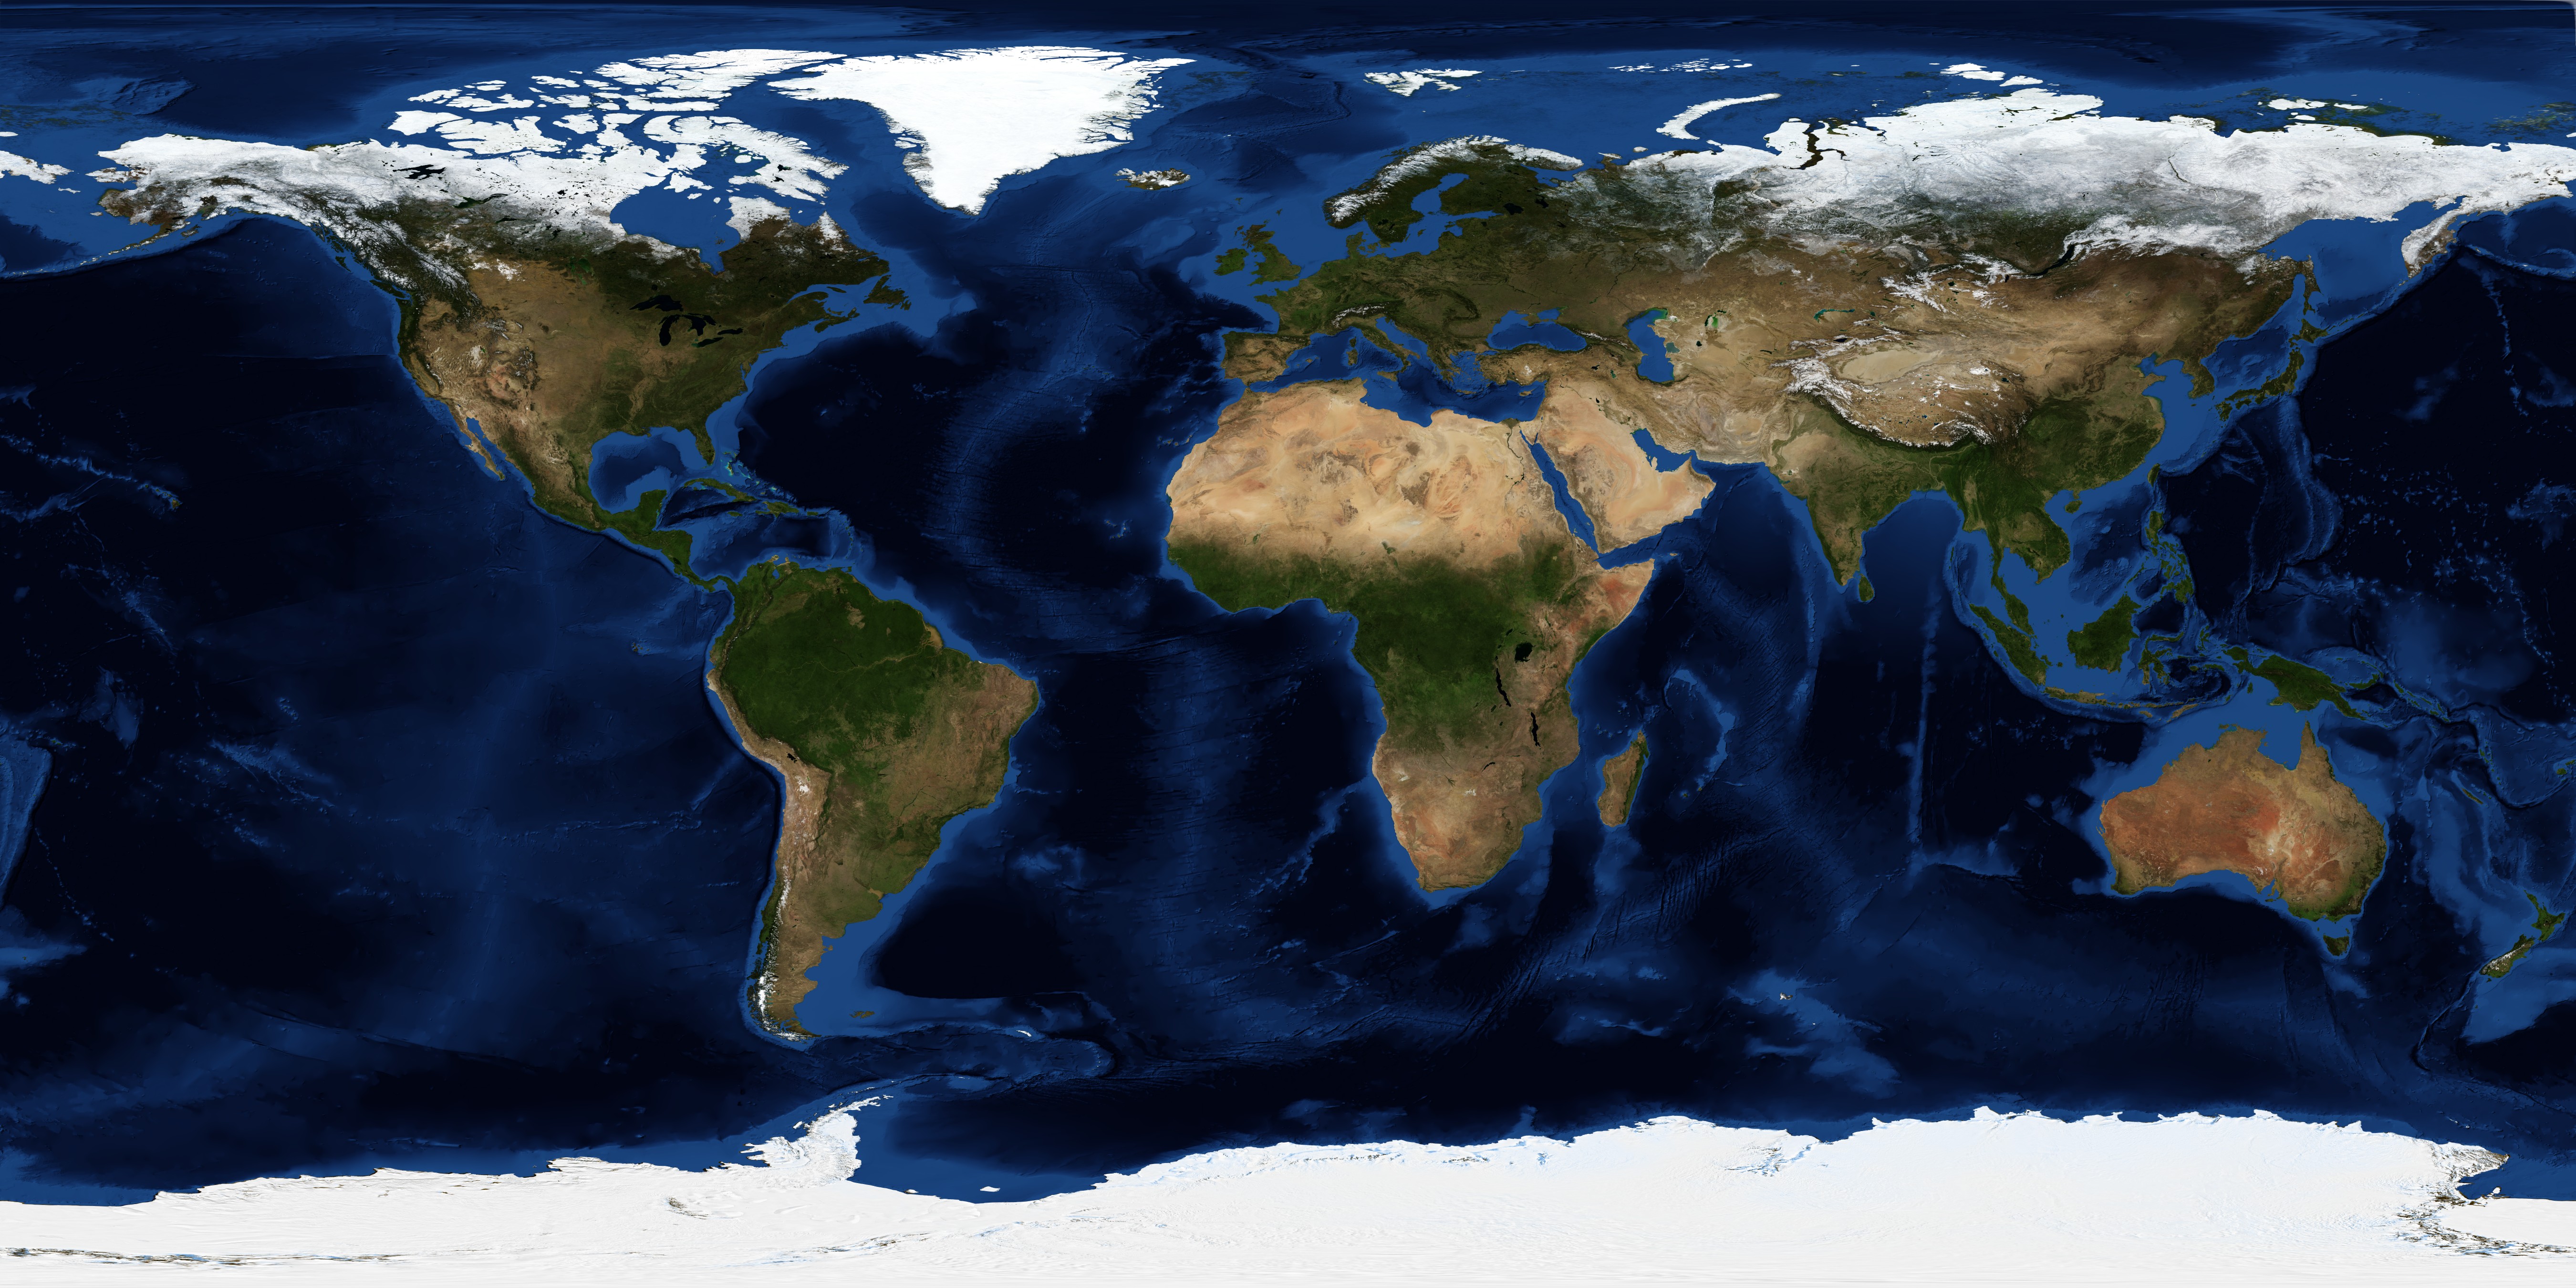 October, Blue Marble Next Generation w/ Topography and Bathymetry - related image preview